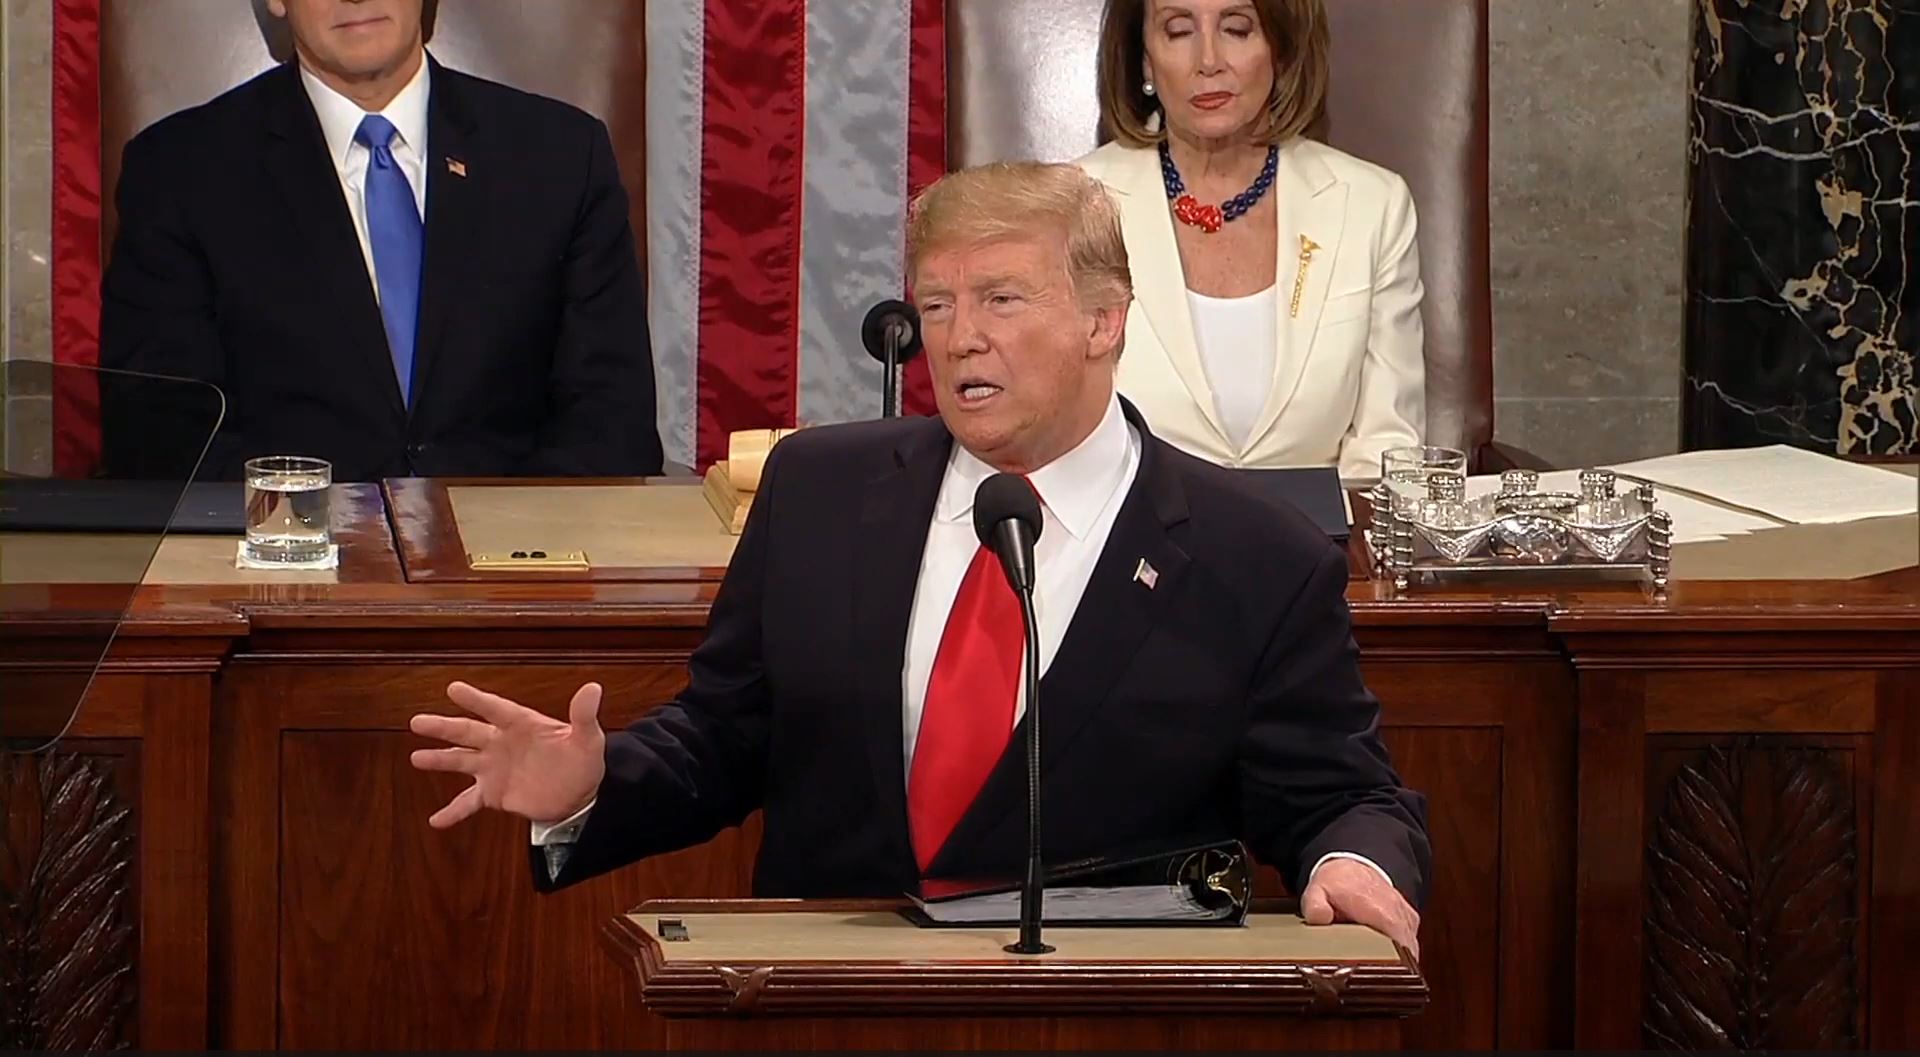 Donald Trump 2019 State of the Union Inspired